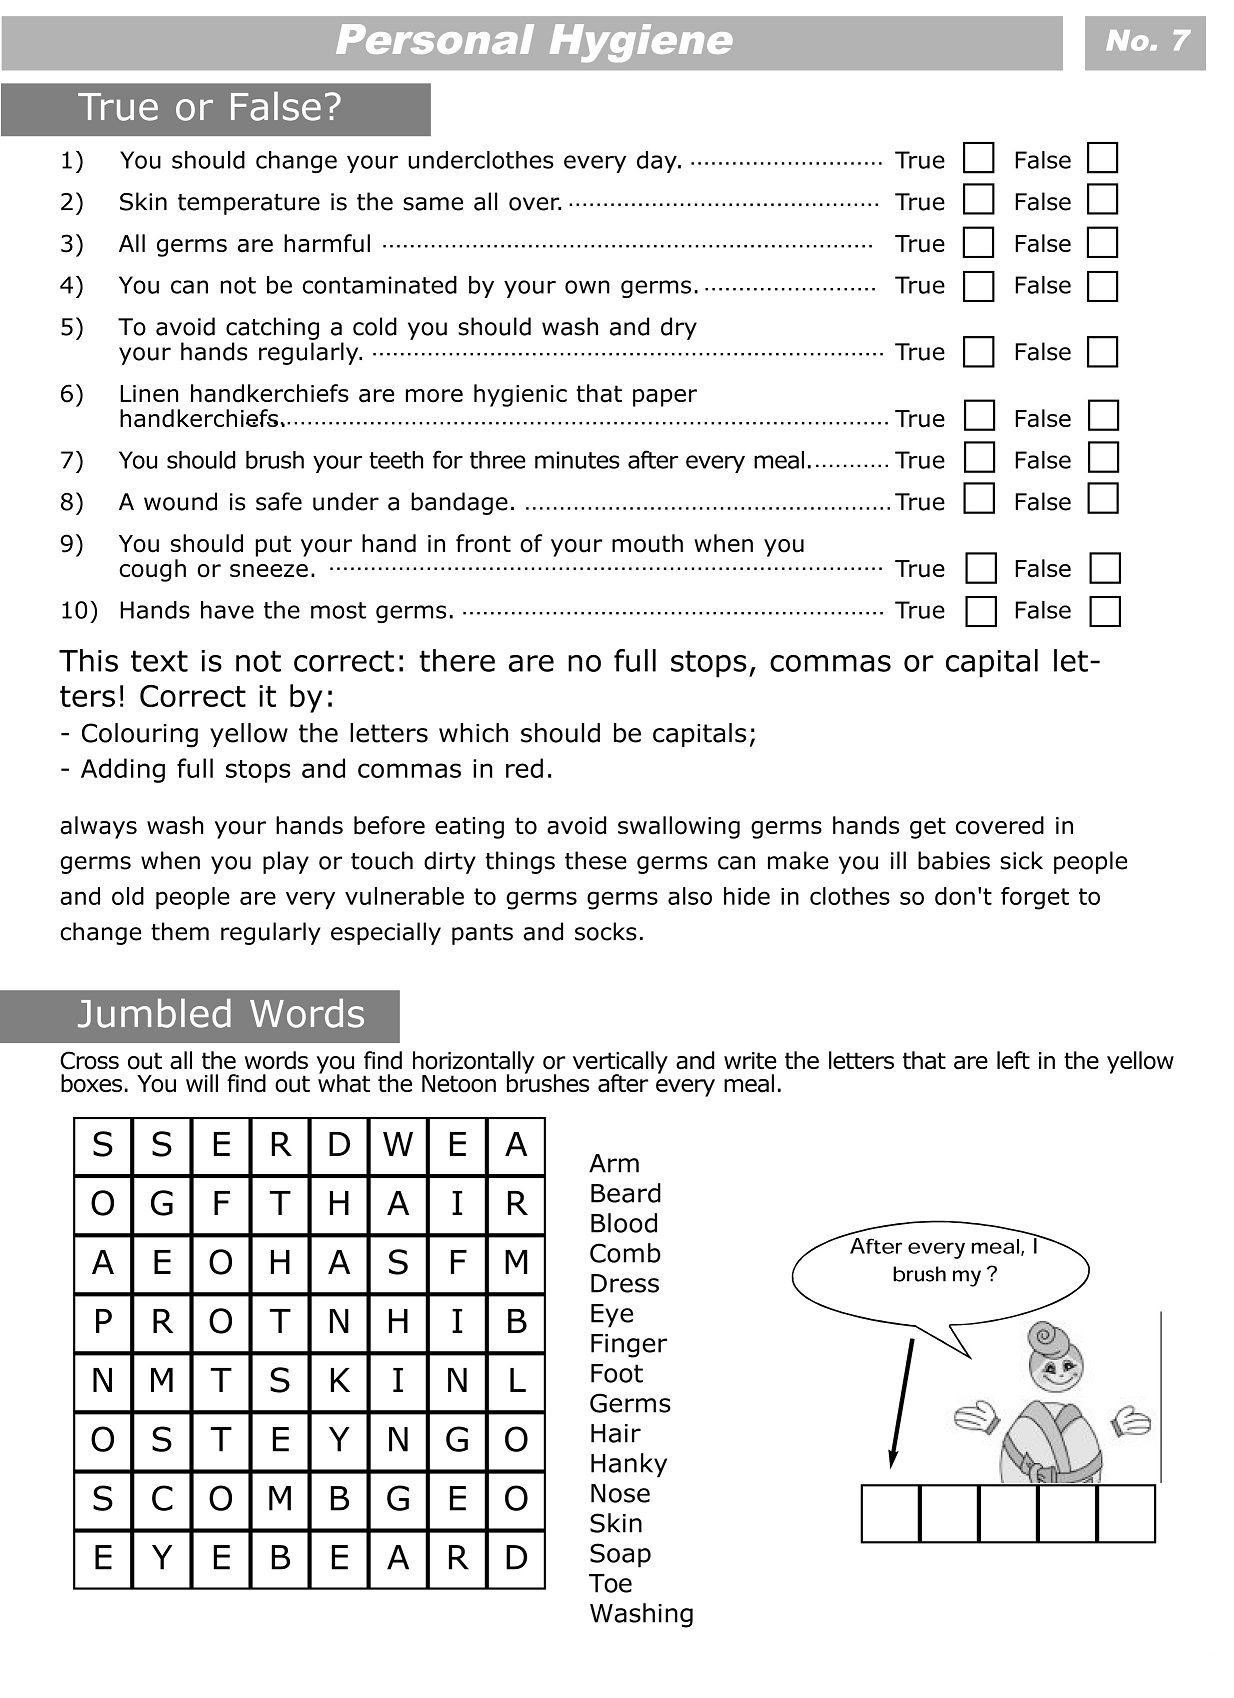 Printable Worksheets For Personal Hygiene | Personal Hygiene - Free | Middle School Printable Worksheets